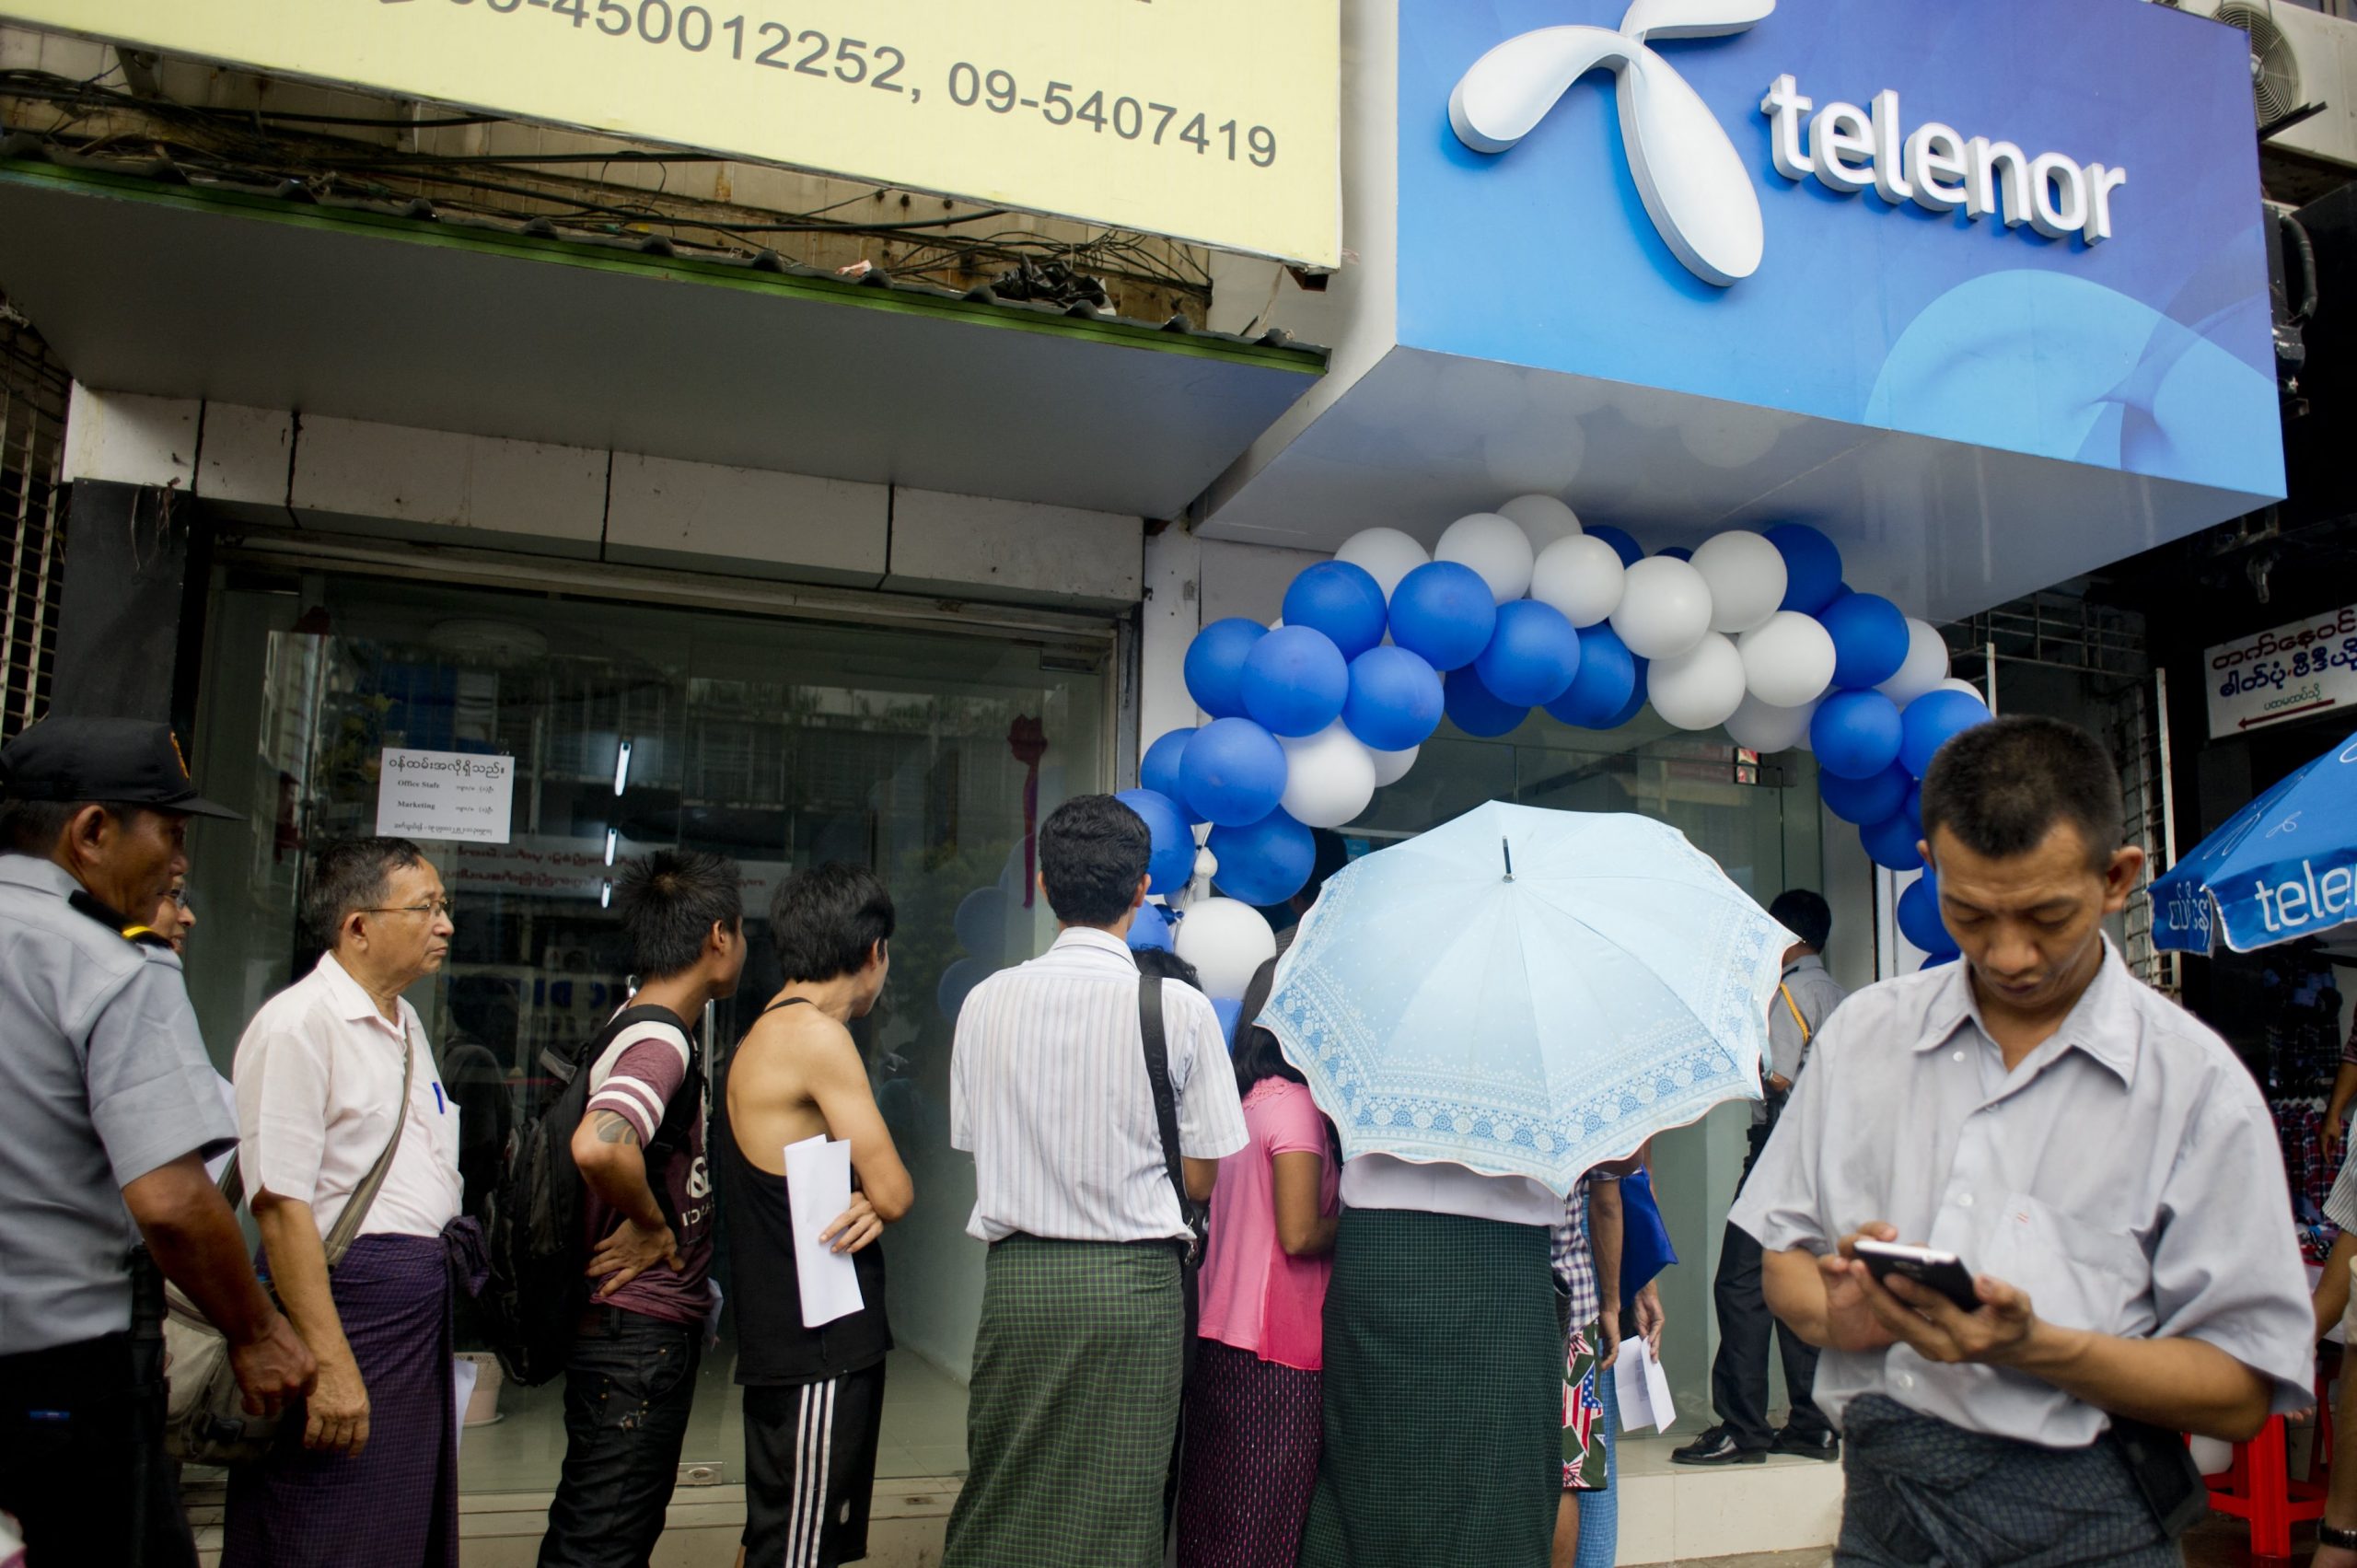 People line up to buy Telenor SIM cards in Yangon in October 2014, just after the company launched in Myanmar (AFP)